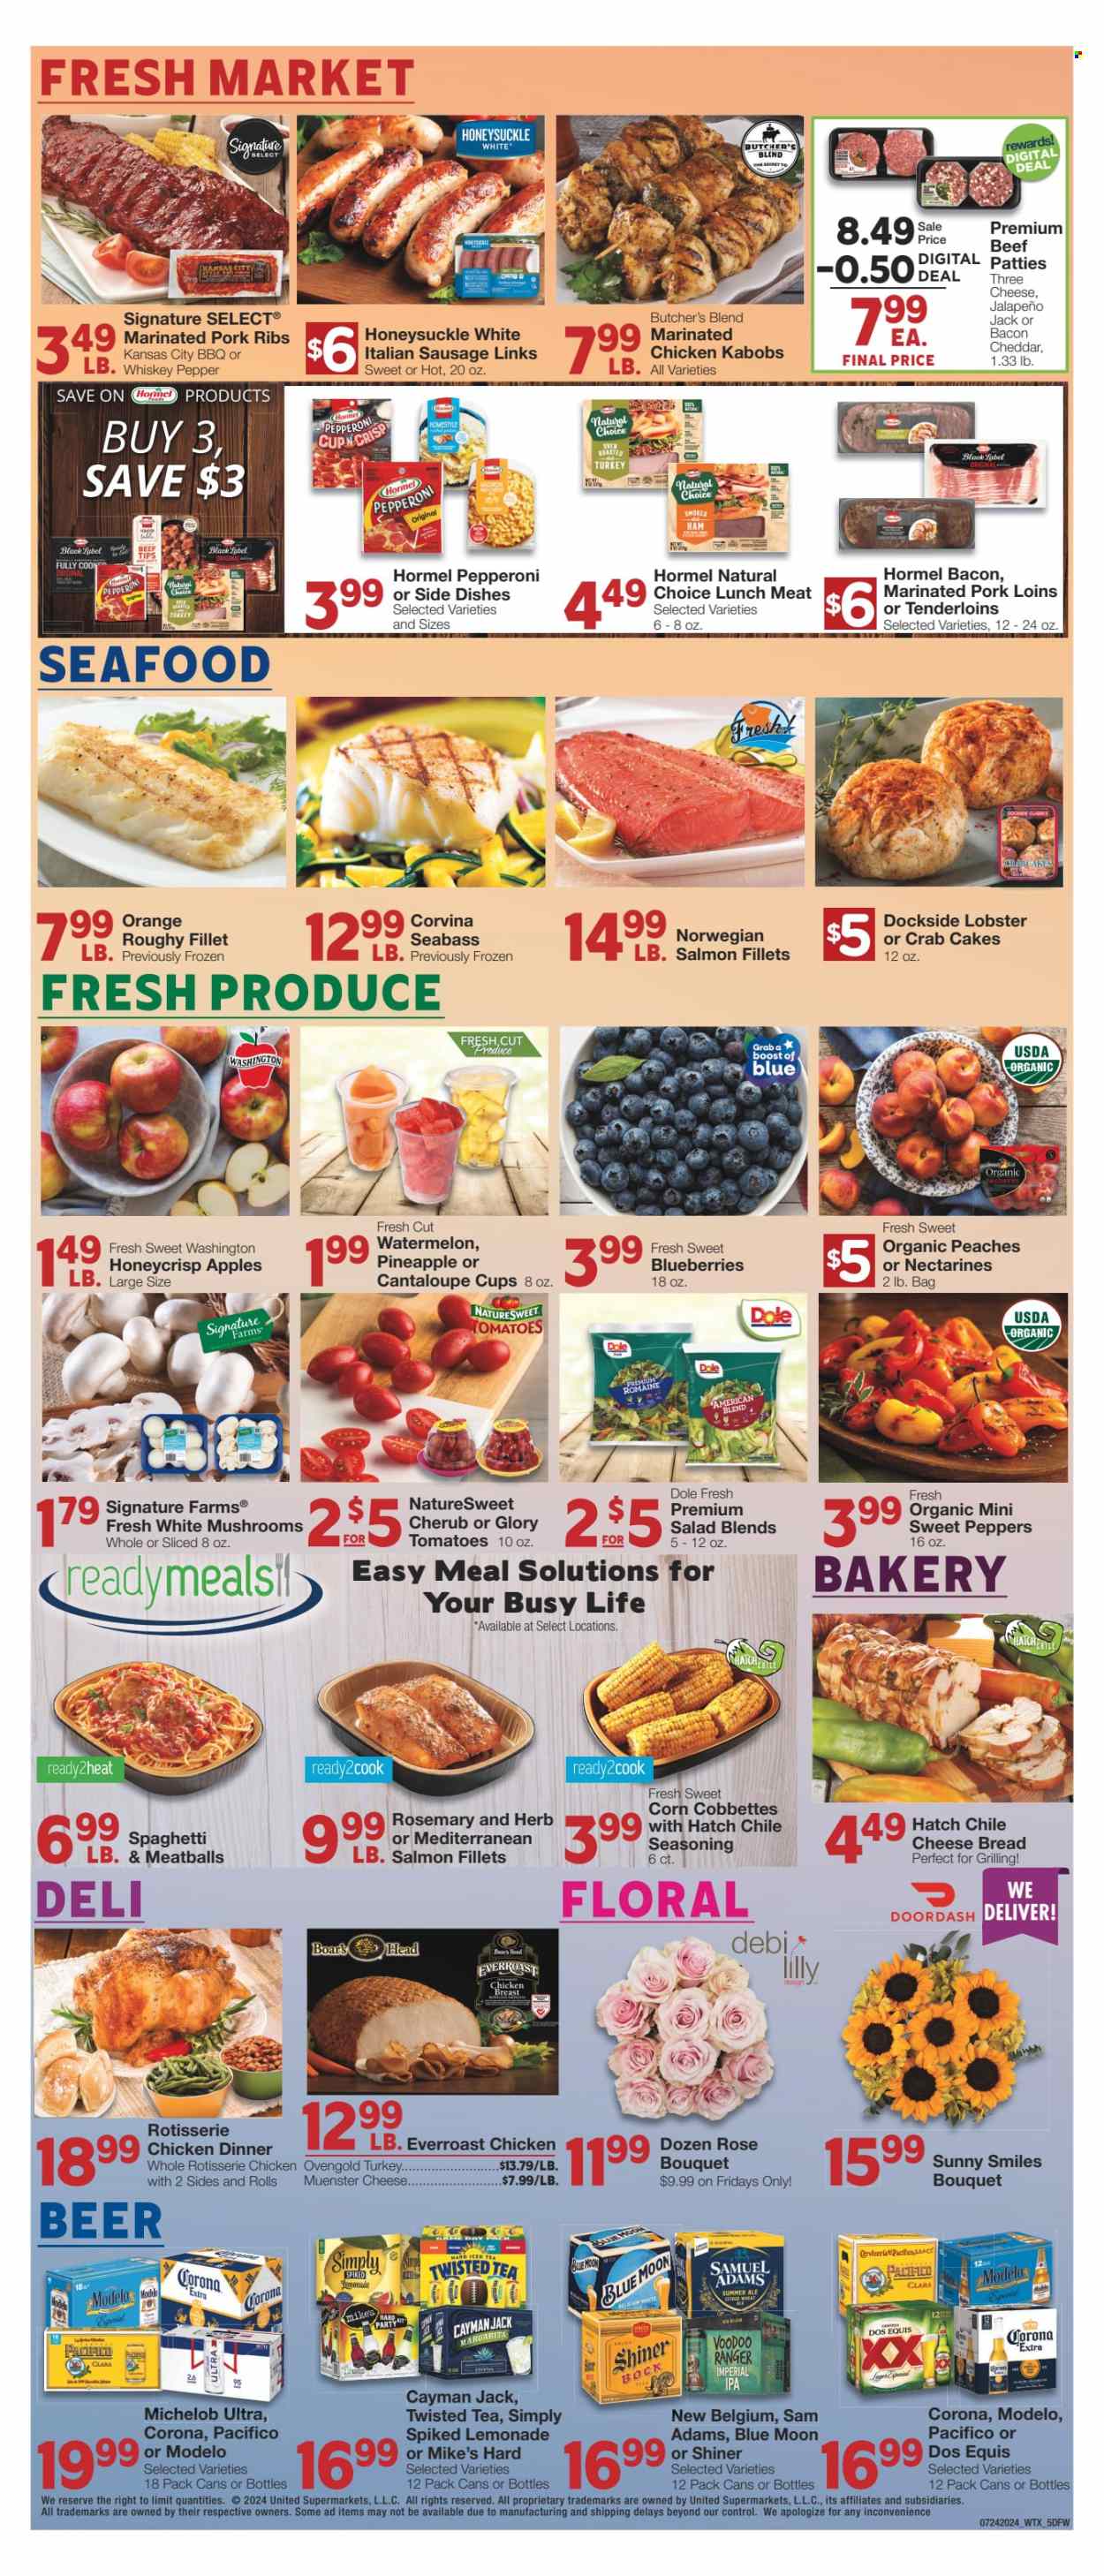 thumbnail - Market Street Flyer - 07/24/2024 - 07/30/2024 - Sales products - mushrooms, cantaloupe, corn, salad greens, sweet peppers, tomatoes, salad, Dole, peppers, jalapeño, sweet corn, blueberries, nectarines, melons, peaches, fish fillets, salmon, salmon fillet, sea bass, seafood, crab cake, lobster cakes, spaghetti, chicken roast, meatballs, pasta, chicken kabobs, Hormel, Boar's Head, ready meal, kabobs, ham, chicken breasts, smoked ham, turkey ham, pepperoni, italian sausage, lunch meat, cheddar, Münster cheese, spice, seasoning, lemonade, juice, ice tea, Boost, alcohol, ready to drink spirits, beer, Corona Extra, Lager, IPA, Modelo, Shiner Bock, whole chicken, marinated chicken, meat skewer, ribs, pork meat, pork ribs, marinated pork, bouquet, rose, Dos Equis, Blue Moon, Twisted Tea, Michelob. Page 5.